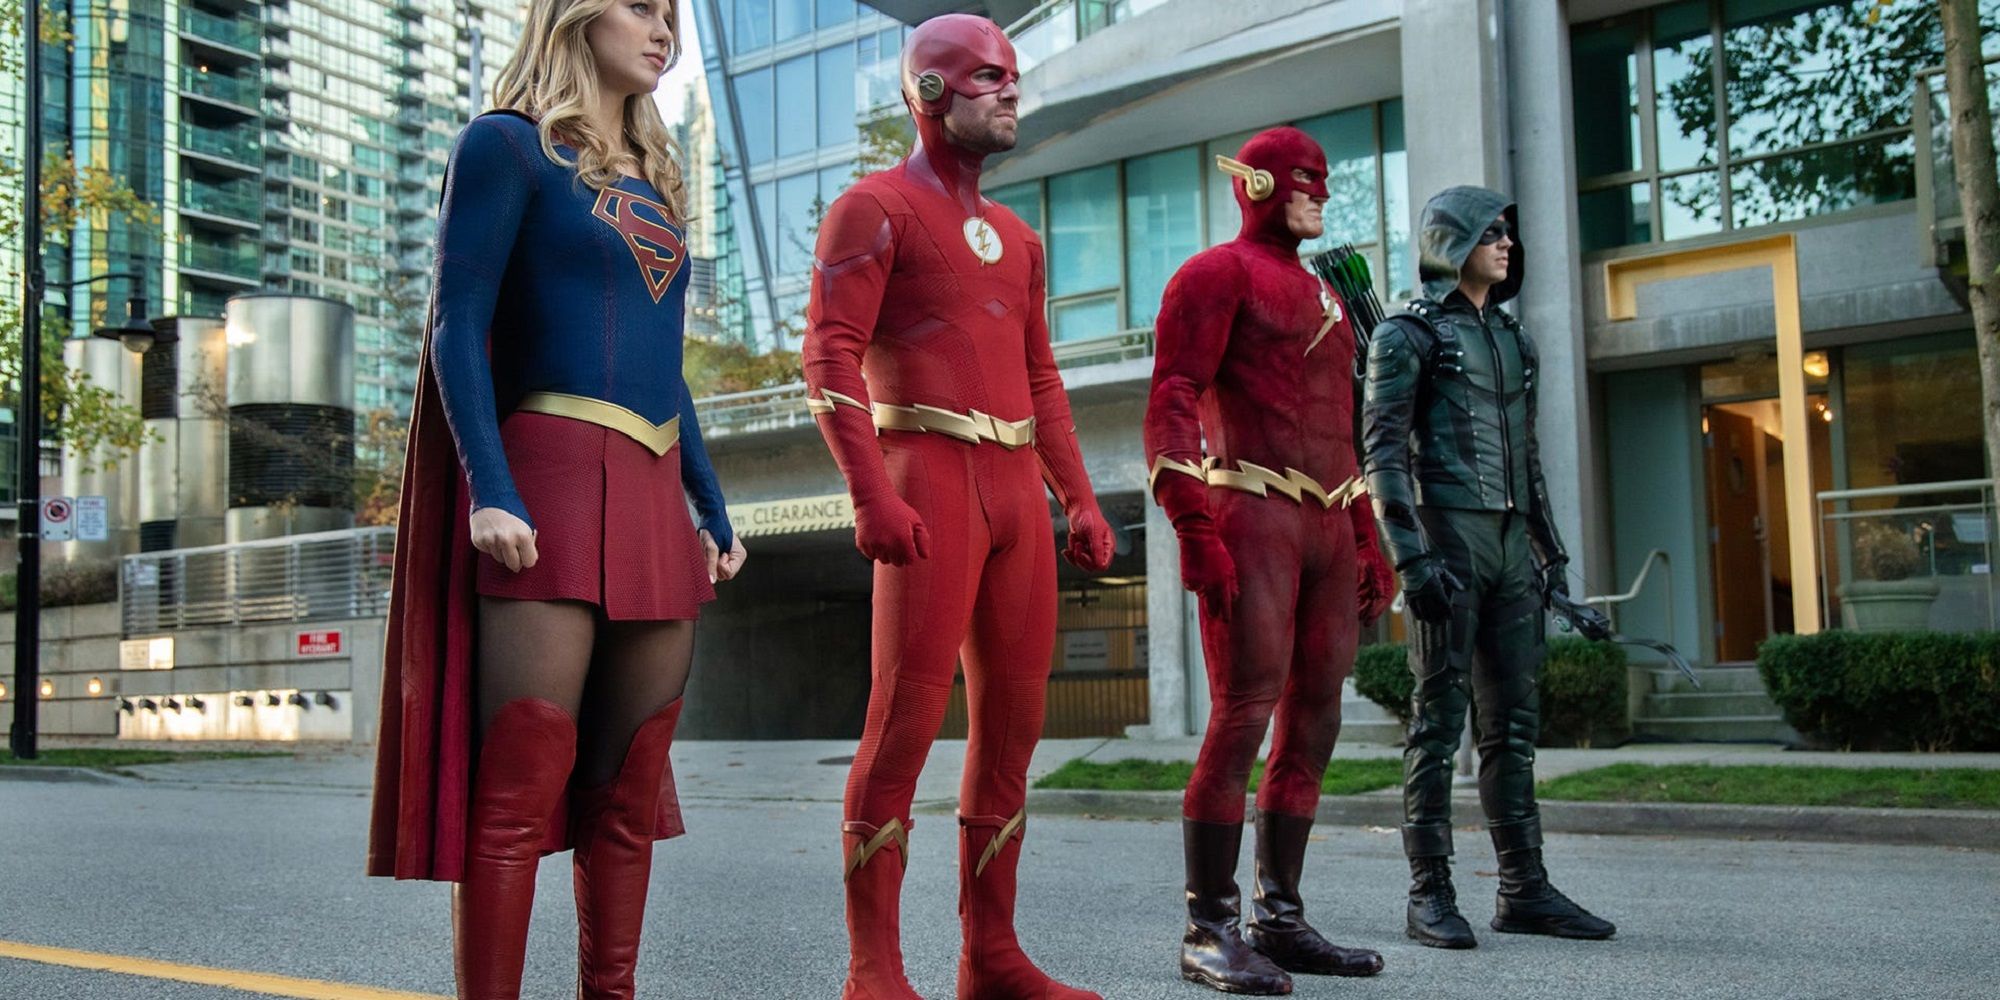 Supergirl, Green Arrow, both versions of The Flash align ready to face battle.